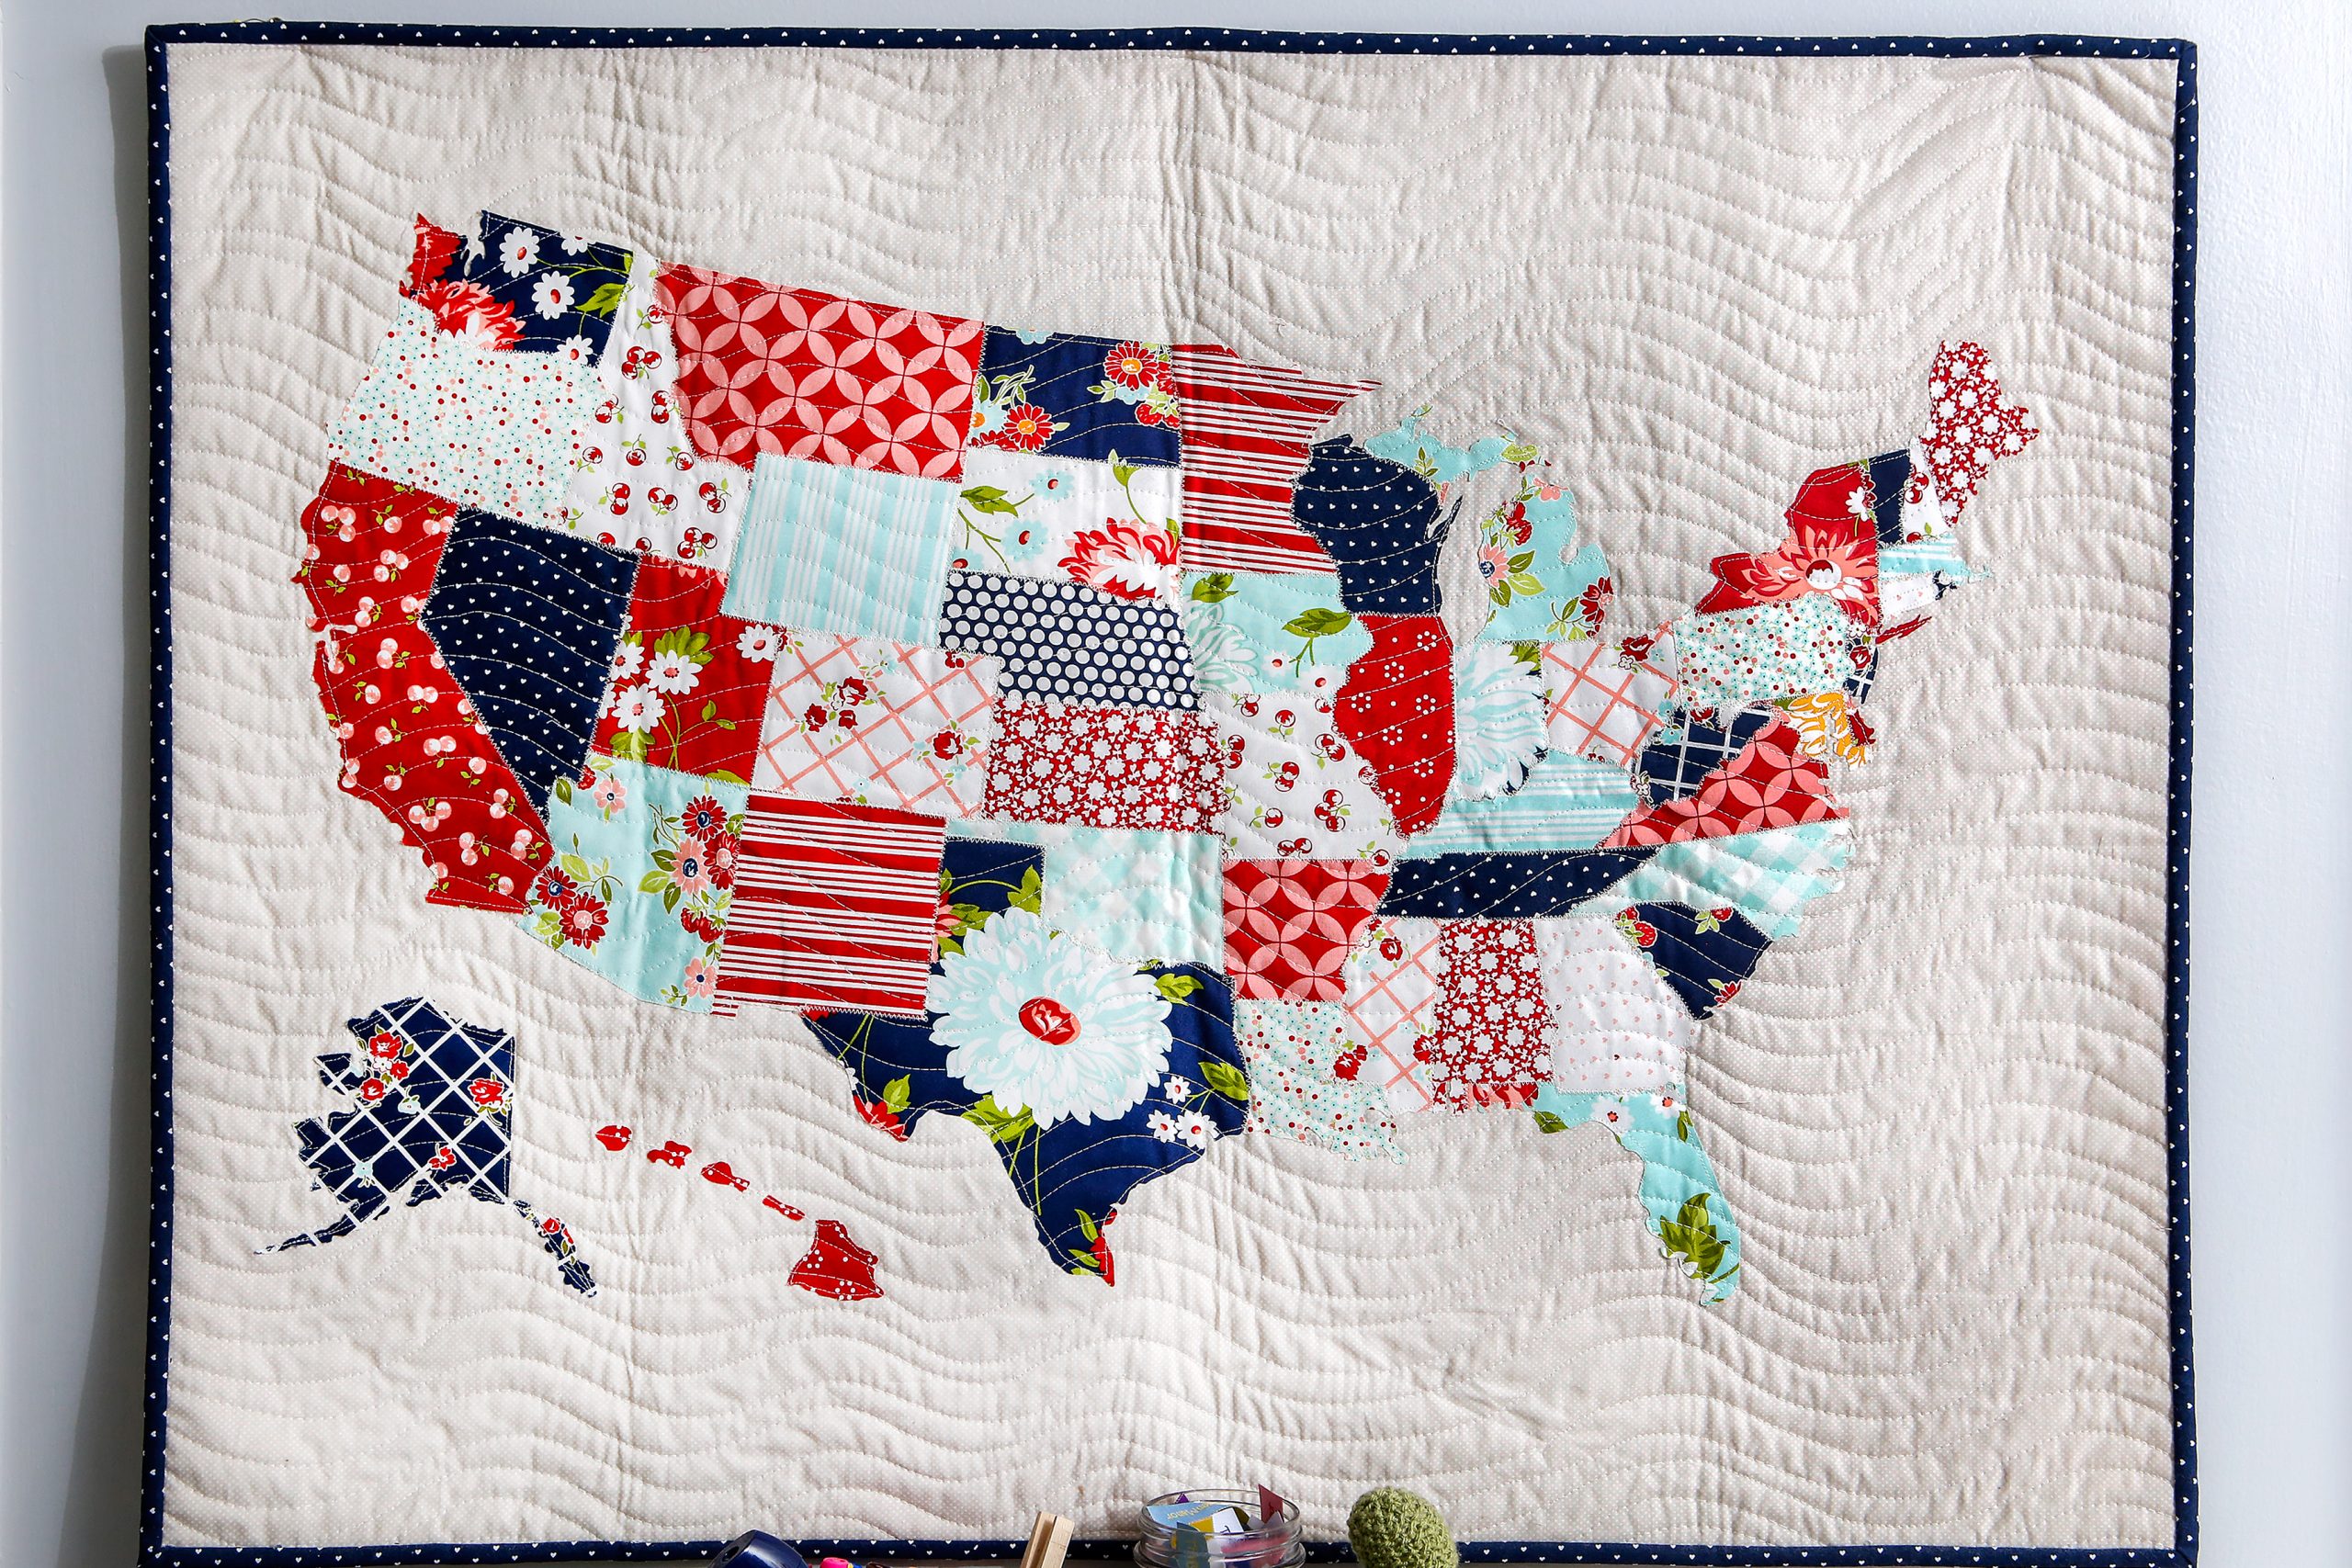 Wavy line quilting provides the background for the American flag quilt made in 2017. 